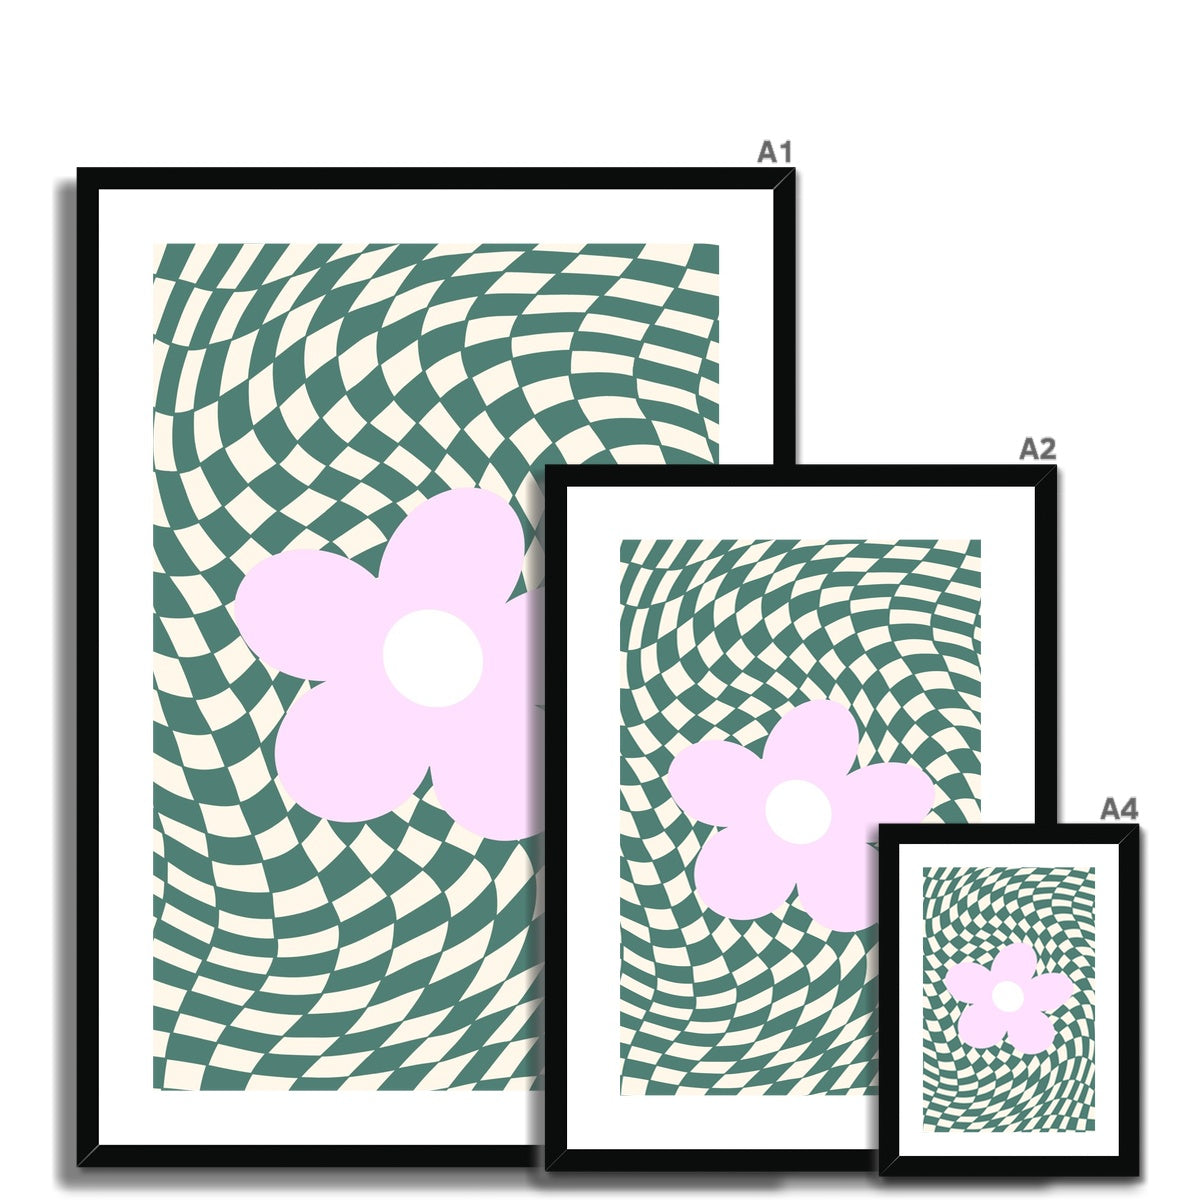 © les muses / Our Wavy Daisy collection features wall art with a psychedelic warped checker and retro daisy design. Danish pastel posters full of checkers and daisies in dreamy pastel shades of pink, green, blue and lilac. A funky floral print perfect for dorm and apartment decor.